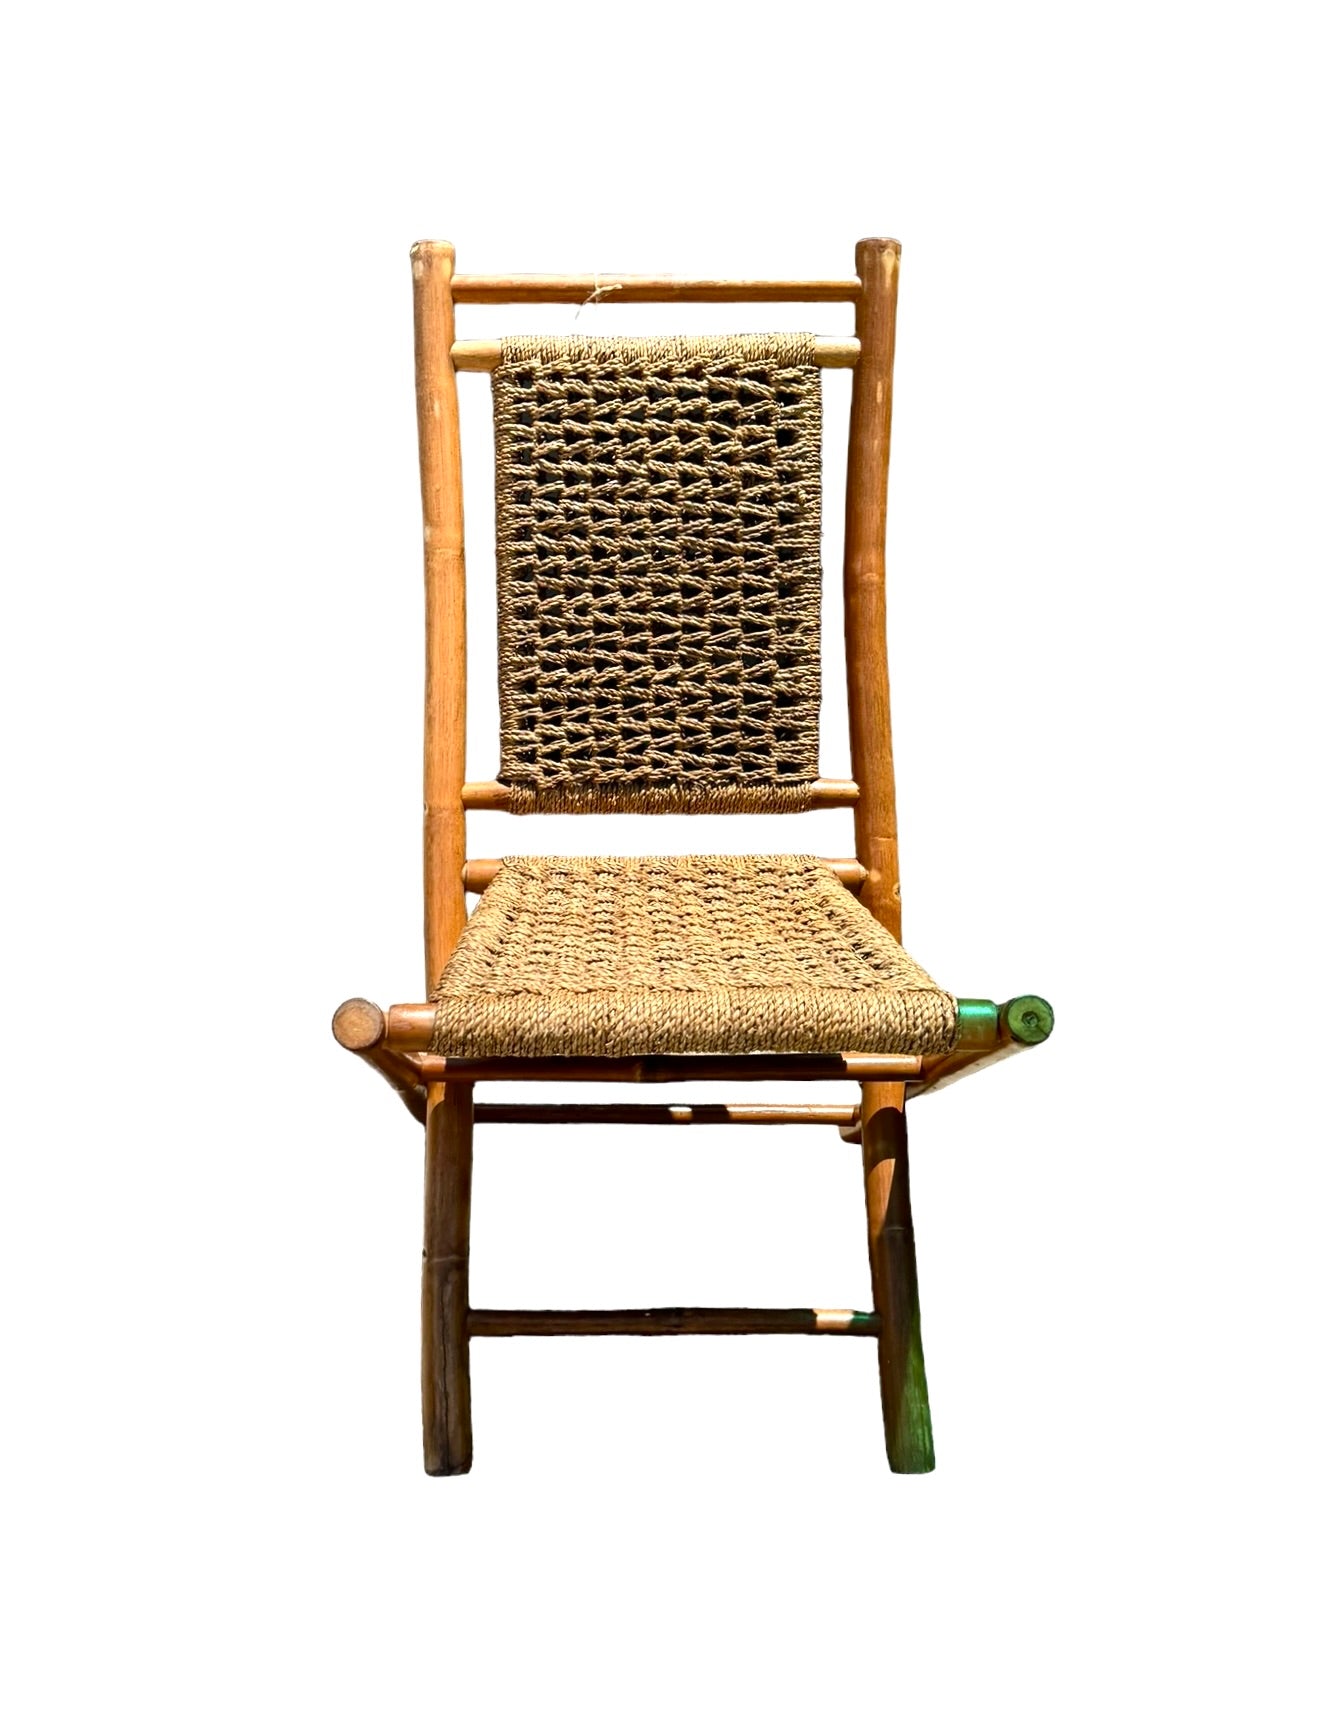 Vintage Bamboo Wood and Cord Woven Rope Seat Folding Chairs and Matching Table. 1960s